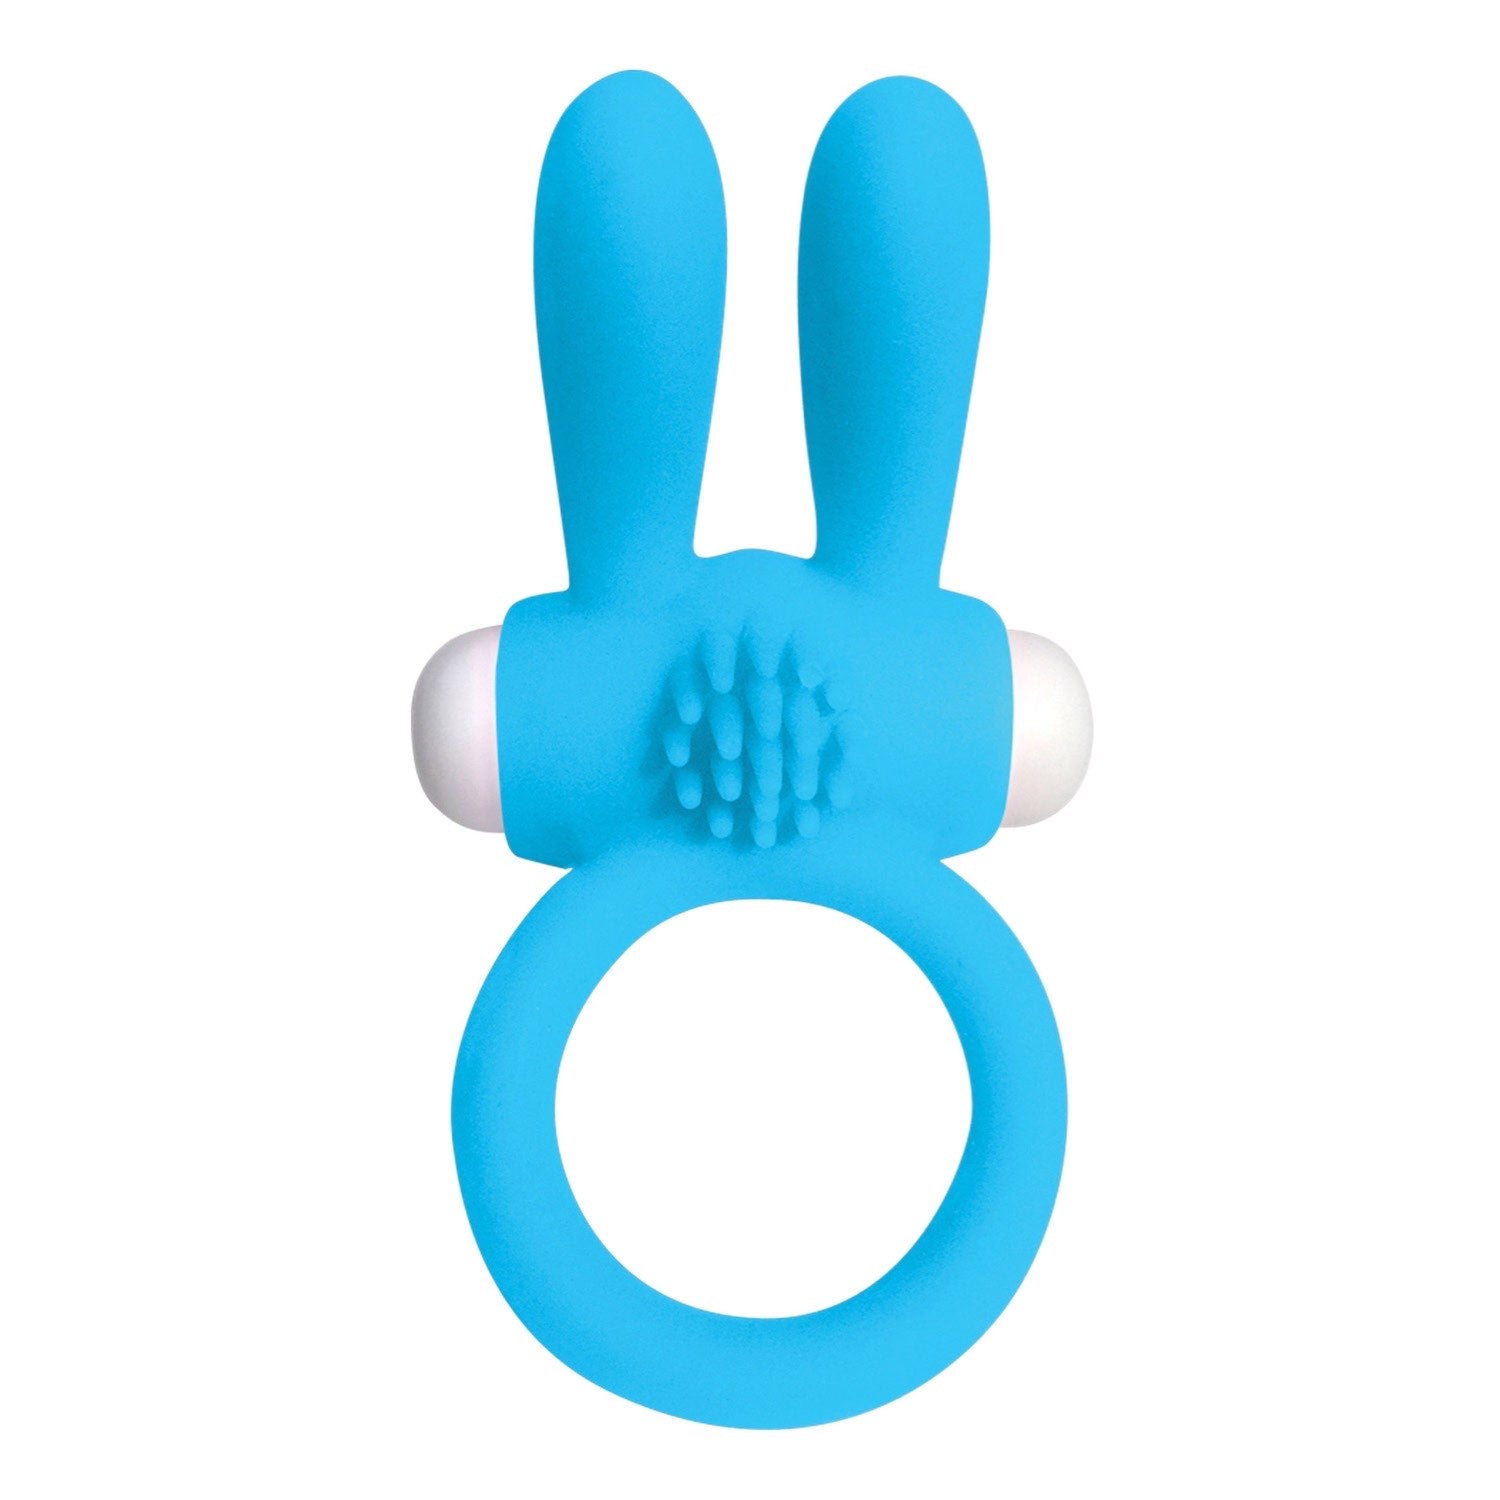  Neon Rabbit Ring - Blue Vibrating Cock Ring by Pipedream